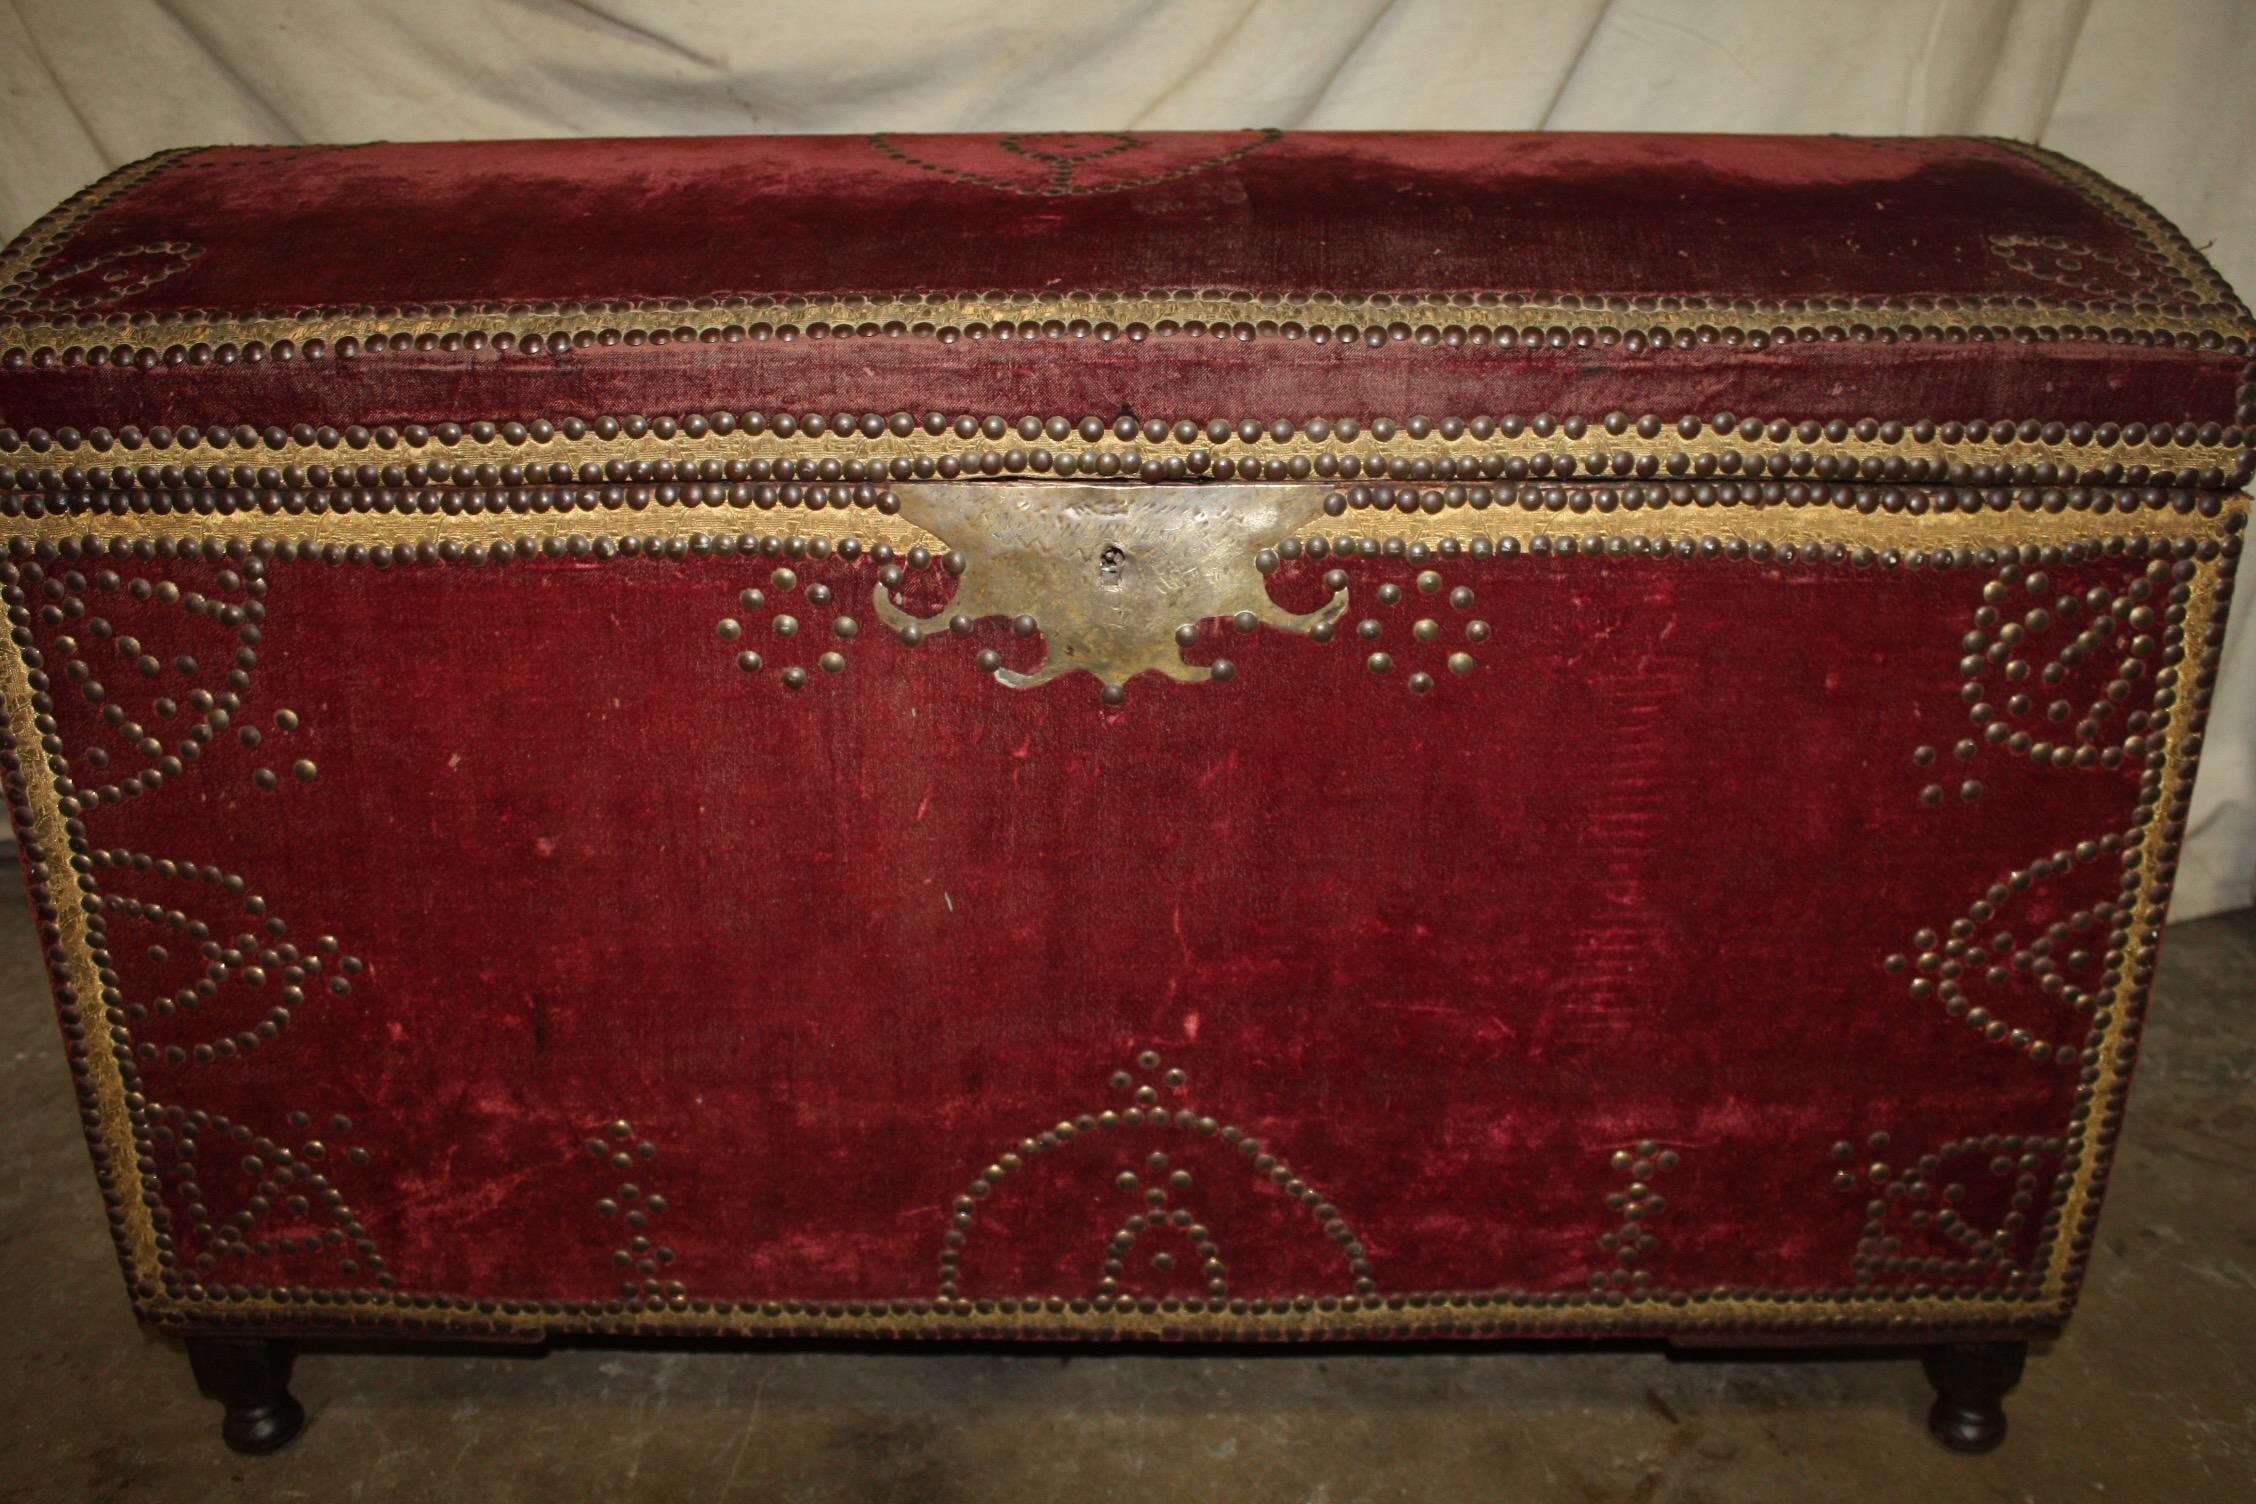 Charming 19th century French trunk or blanket chest.